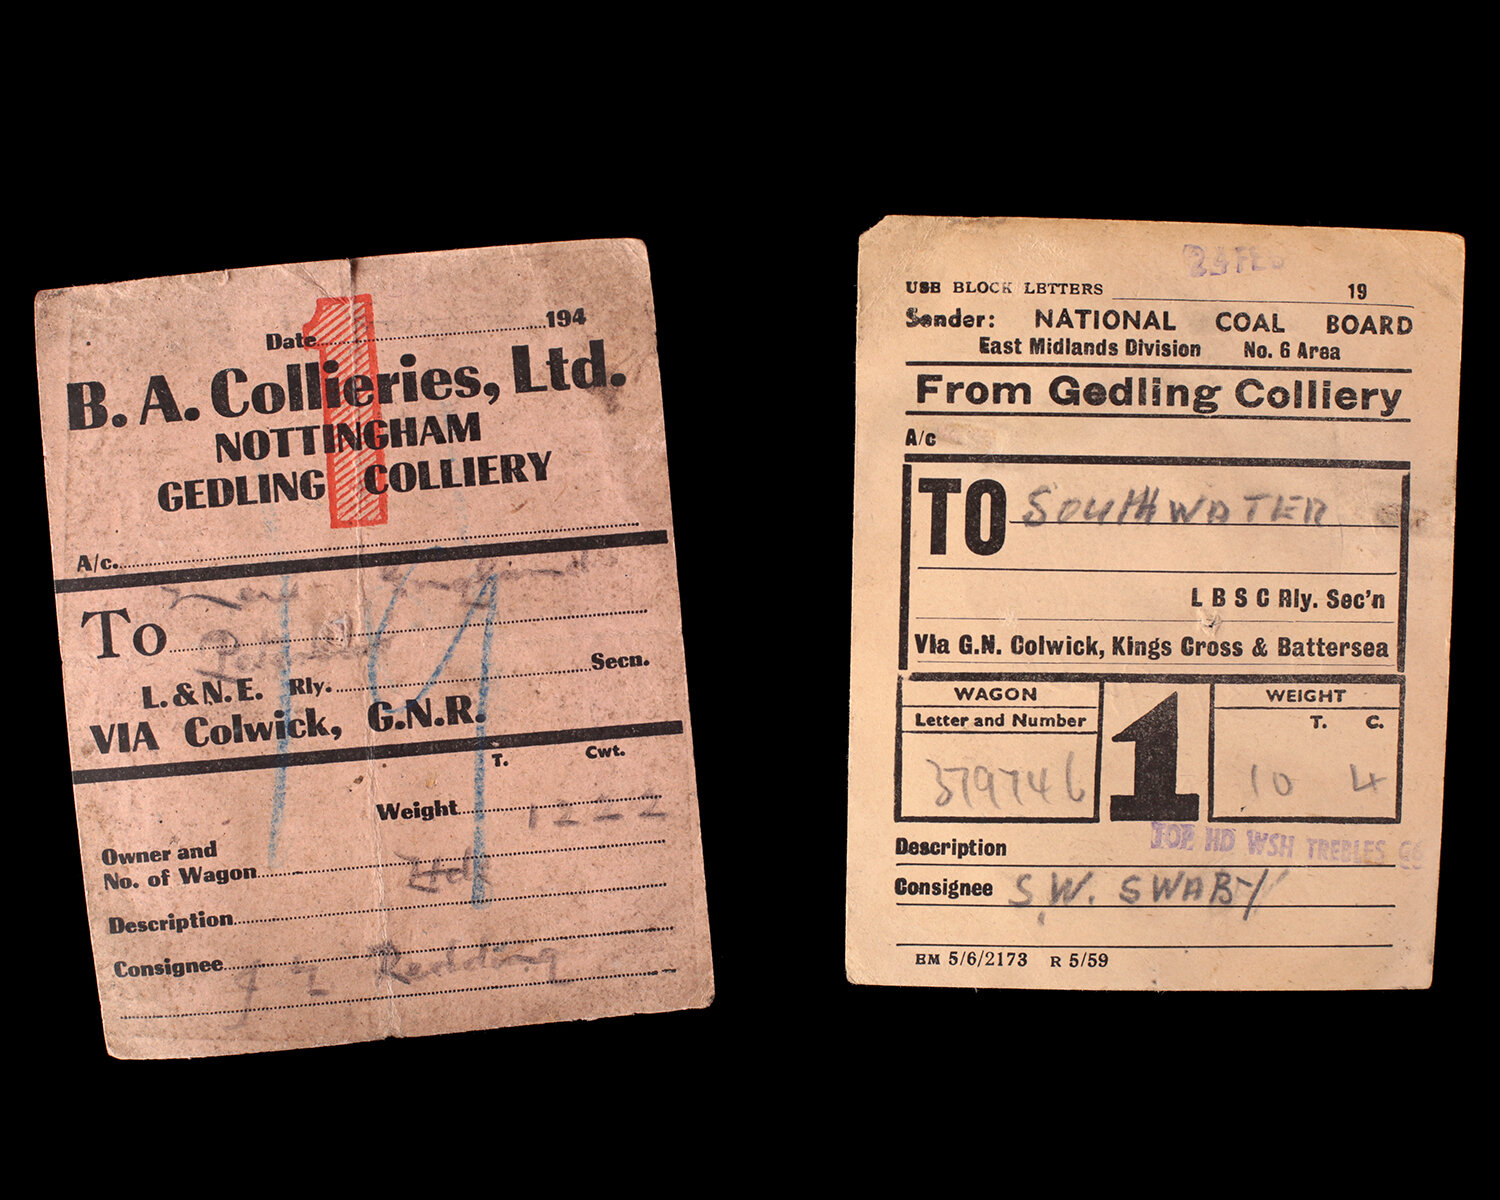 Consignment tickets for coal to be transported from Gedling Colliery to London power stations